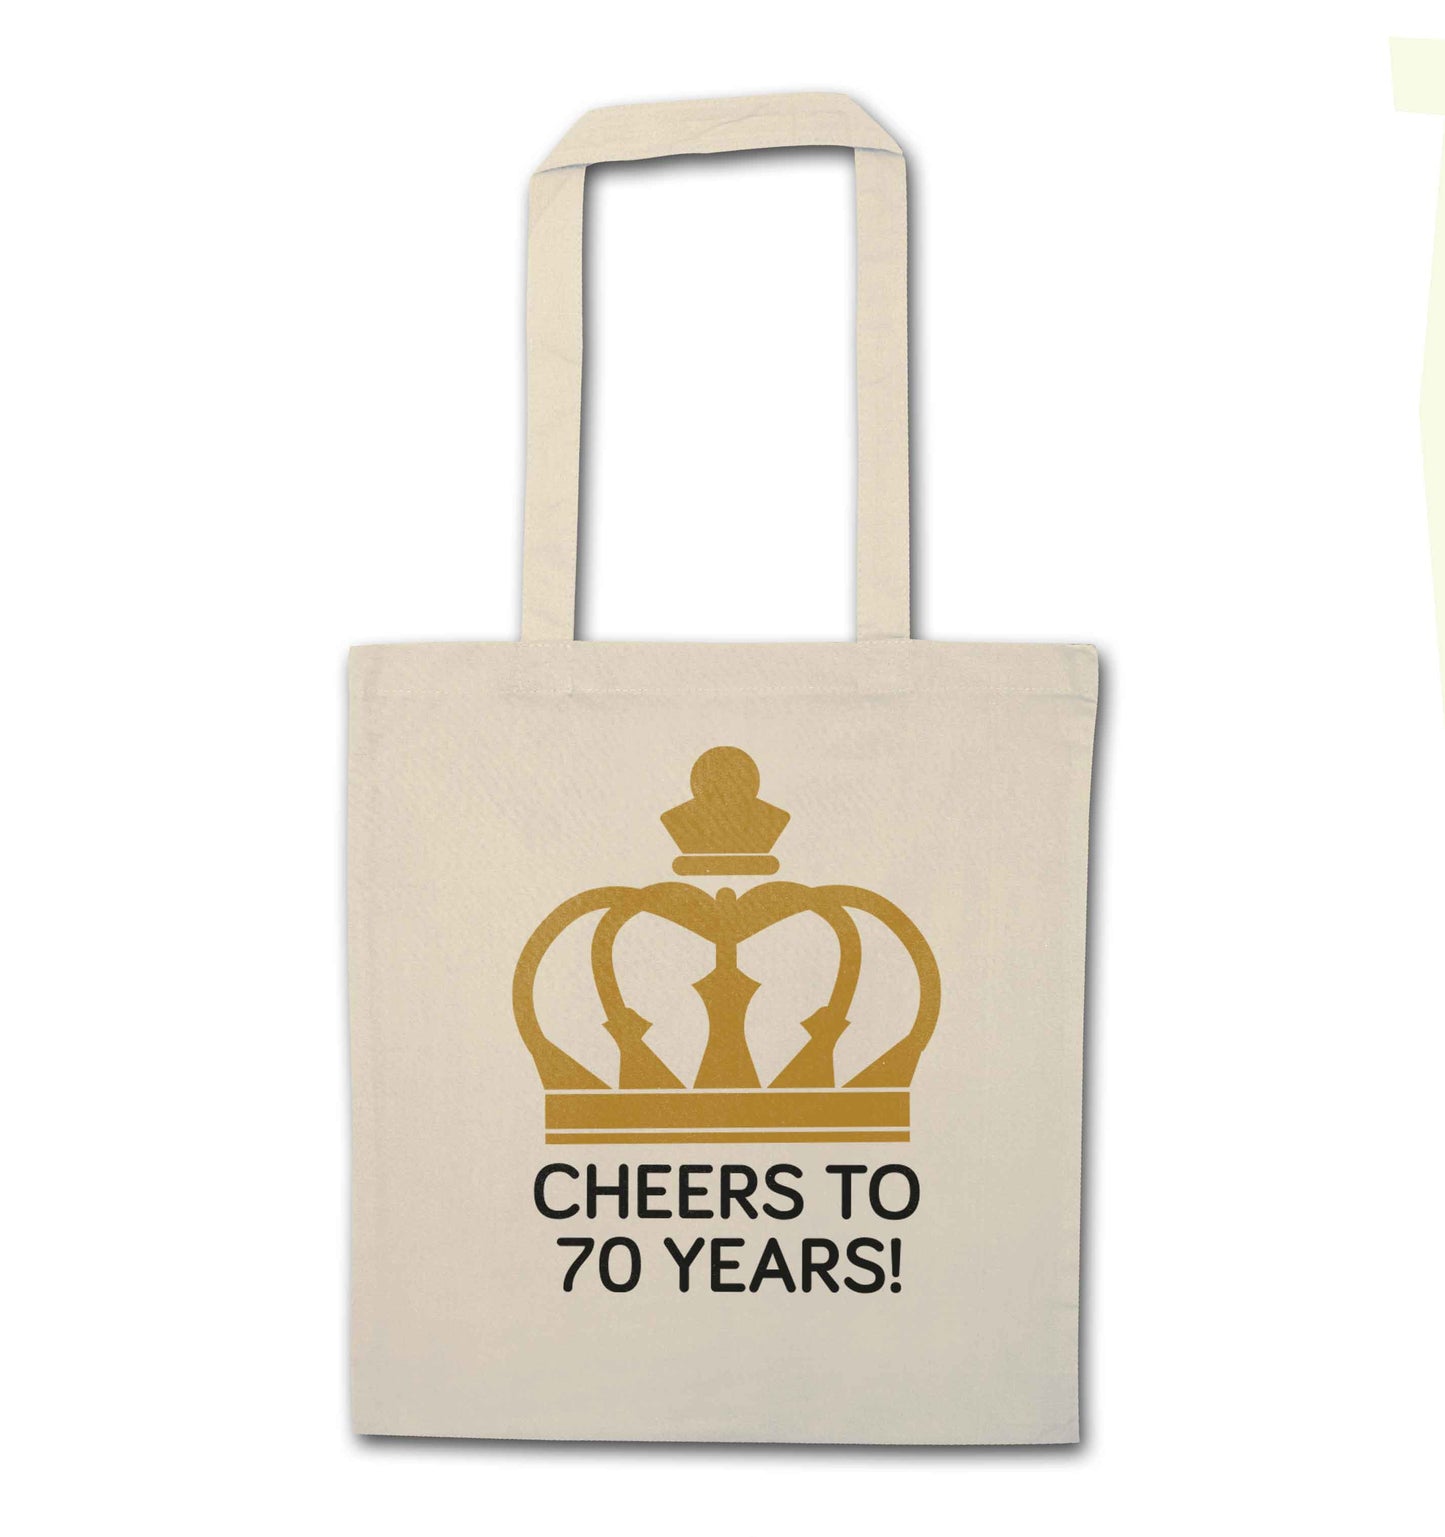 Cheers to 70 years! natural tote bag